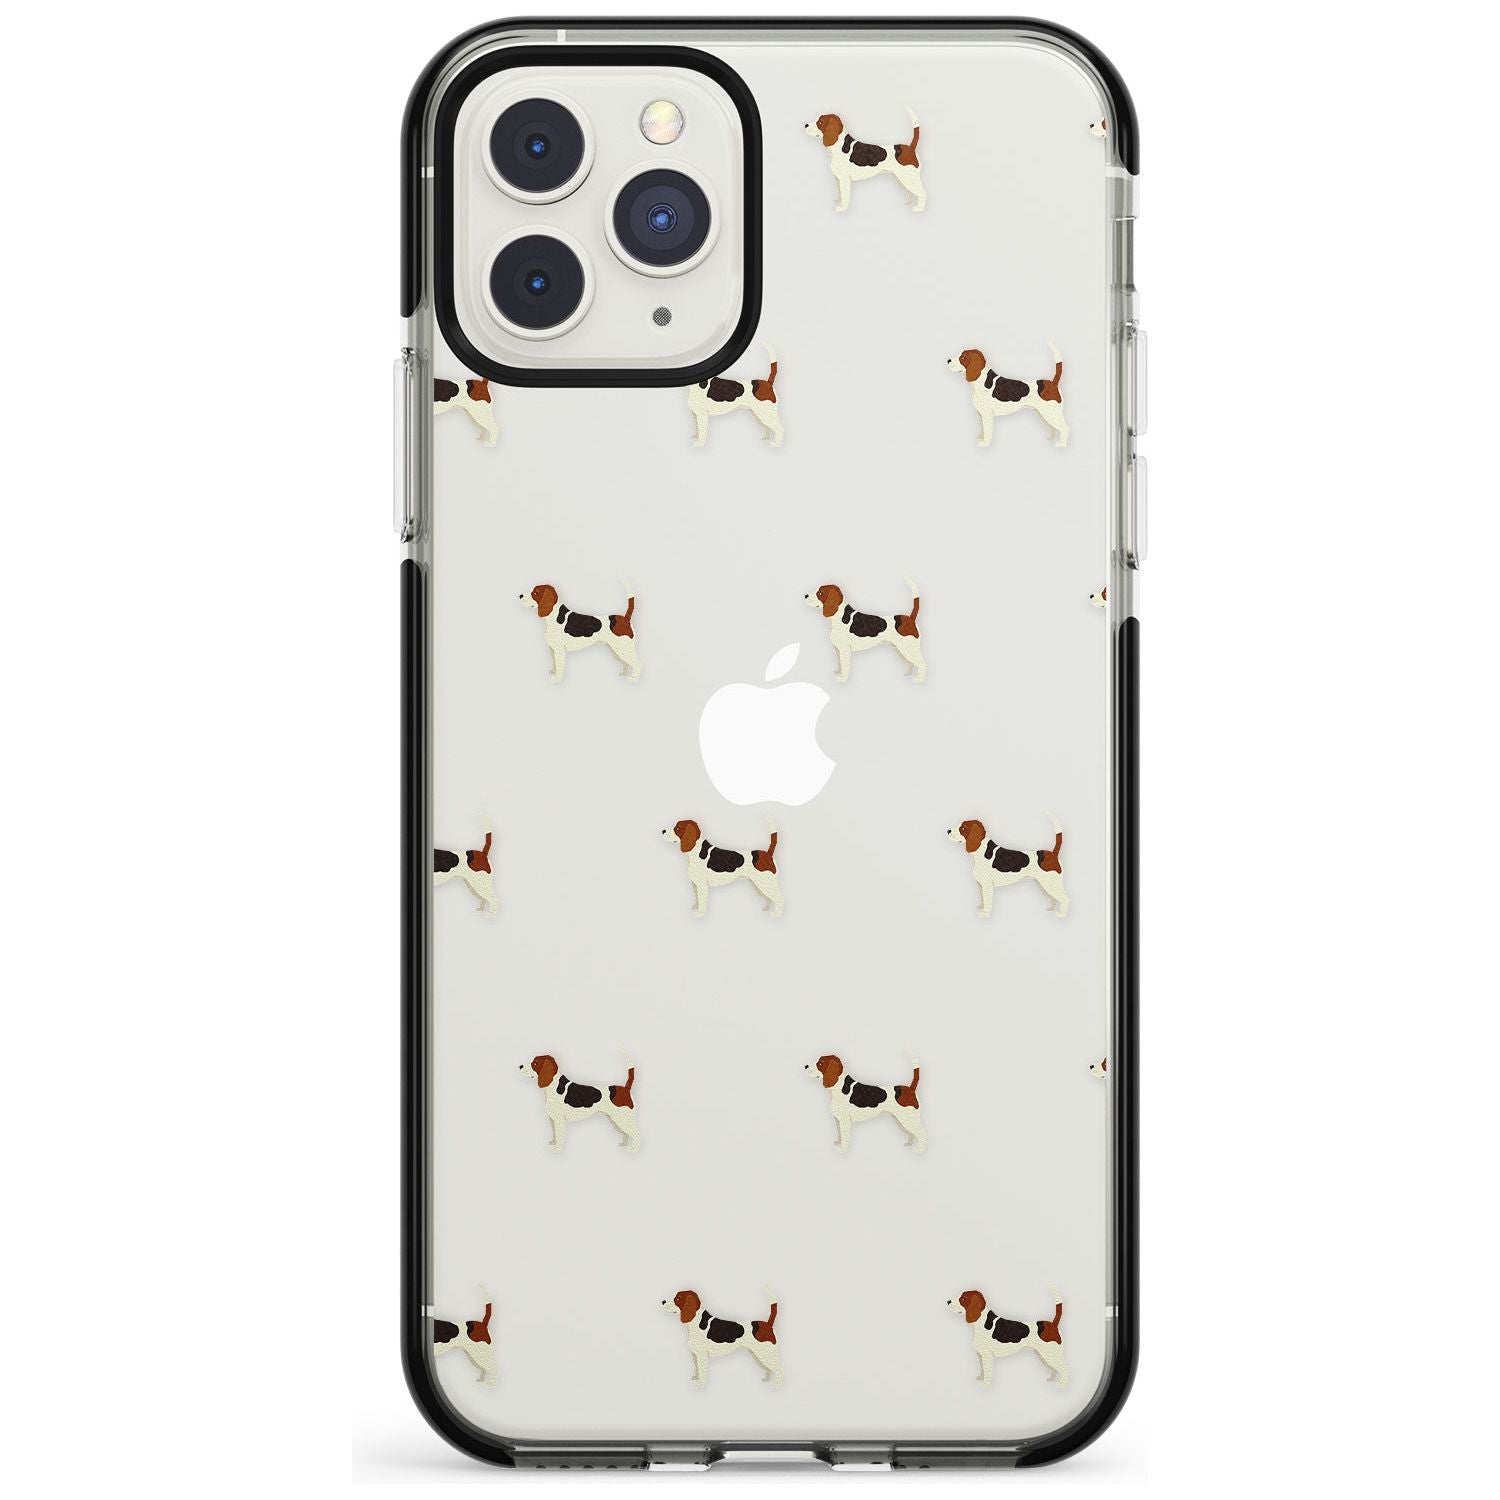 Beagle Dog Pattern Clear Black Impact Phone Case for iPhone 11 Pro Max